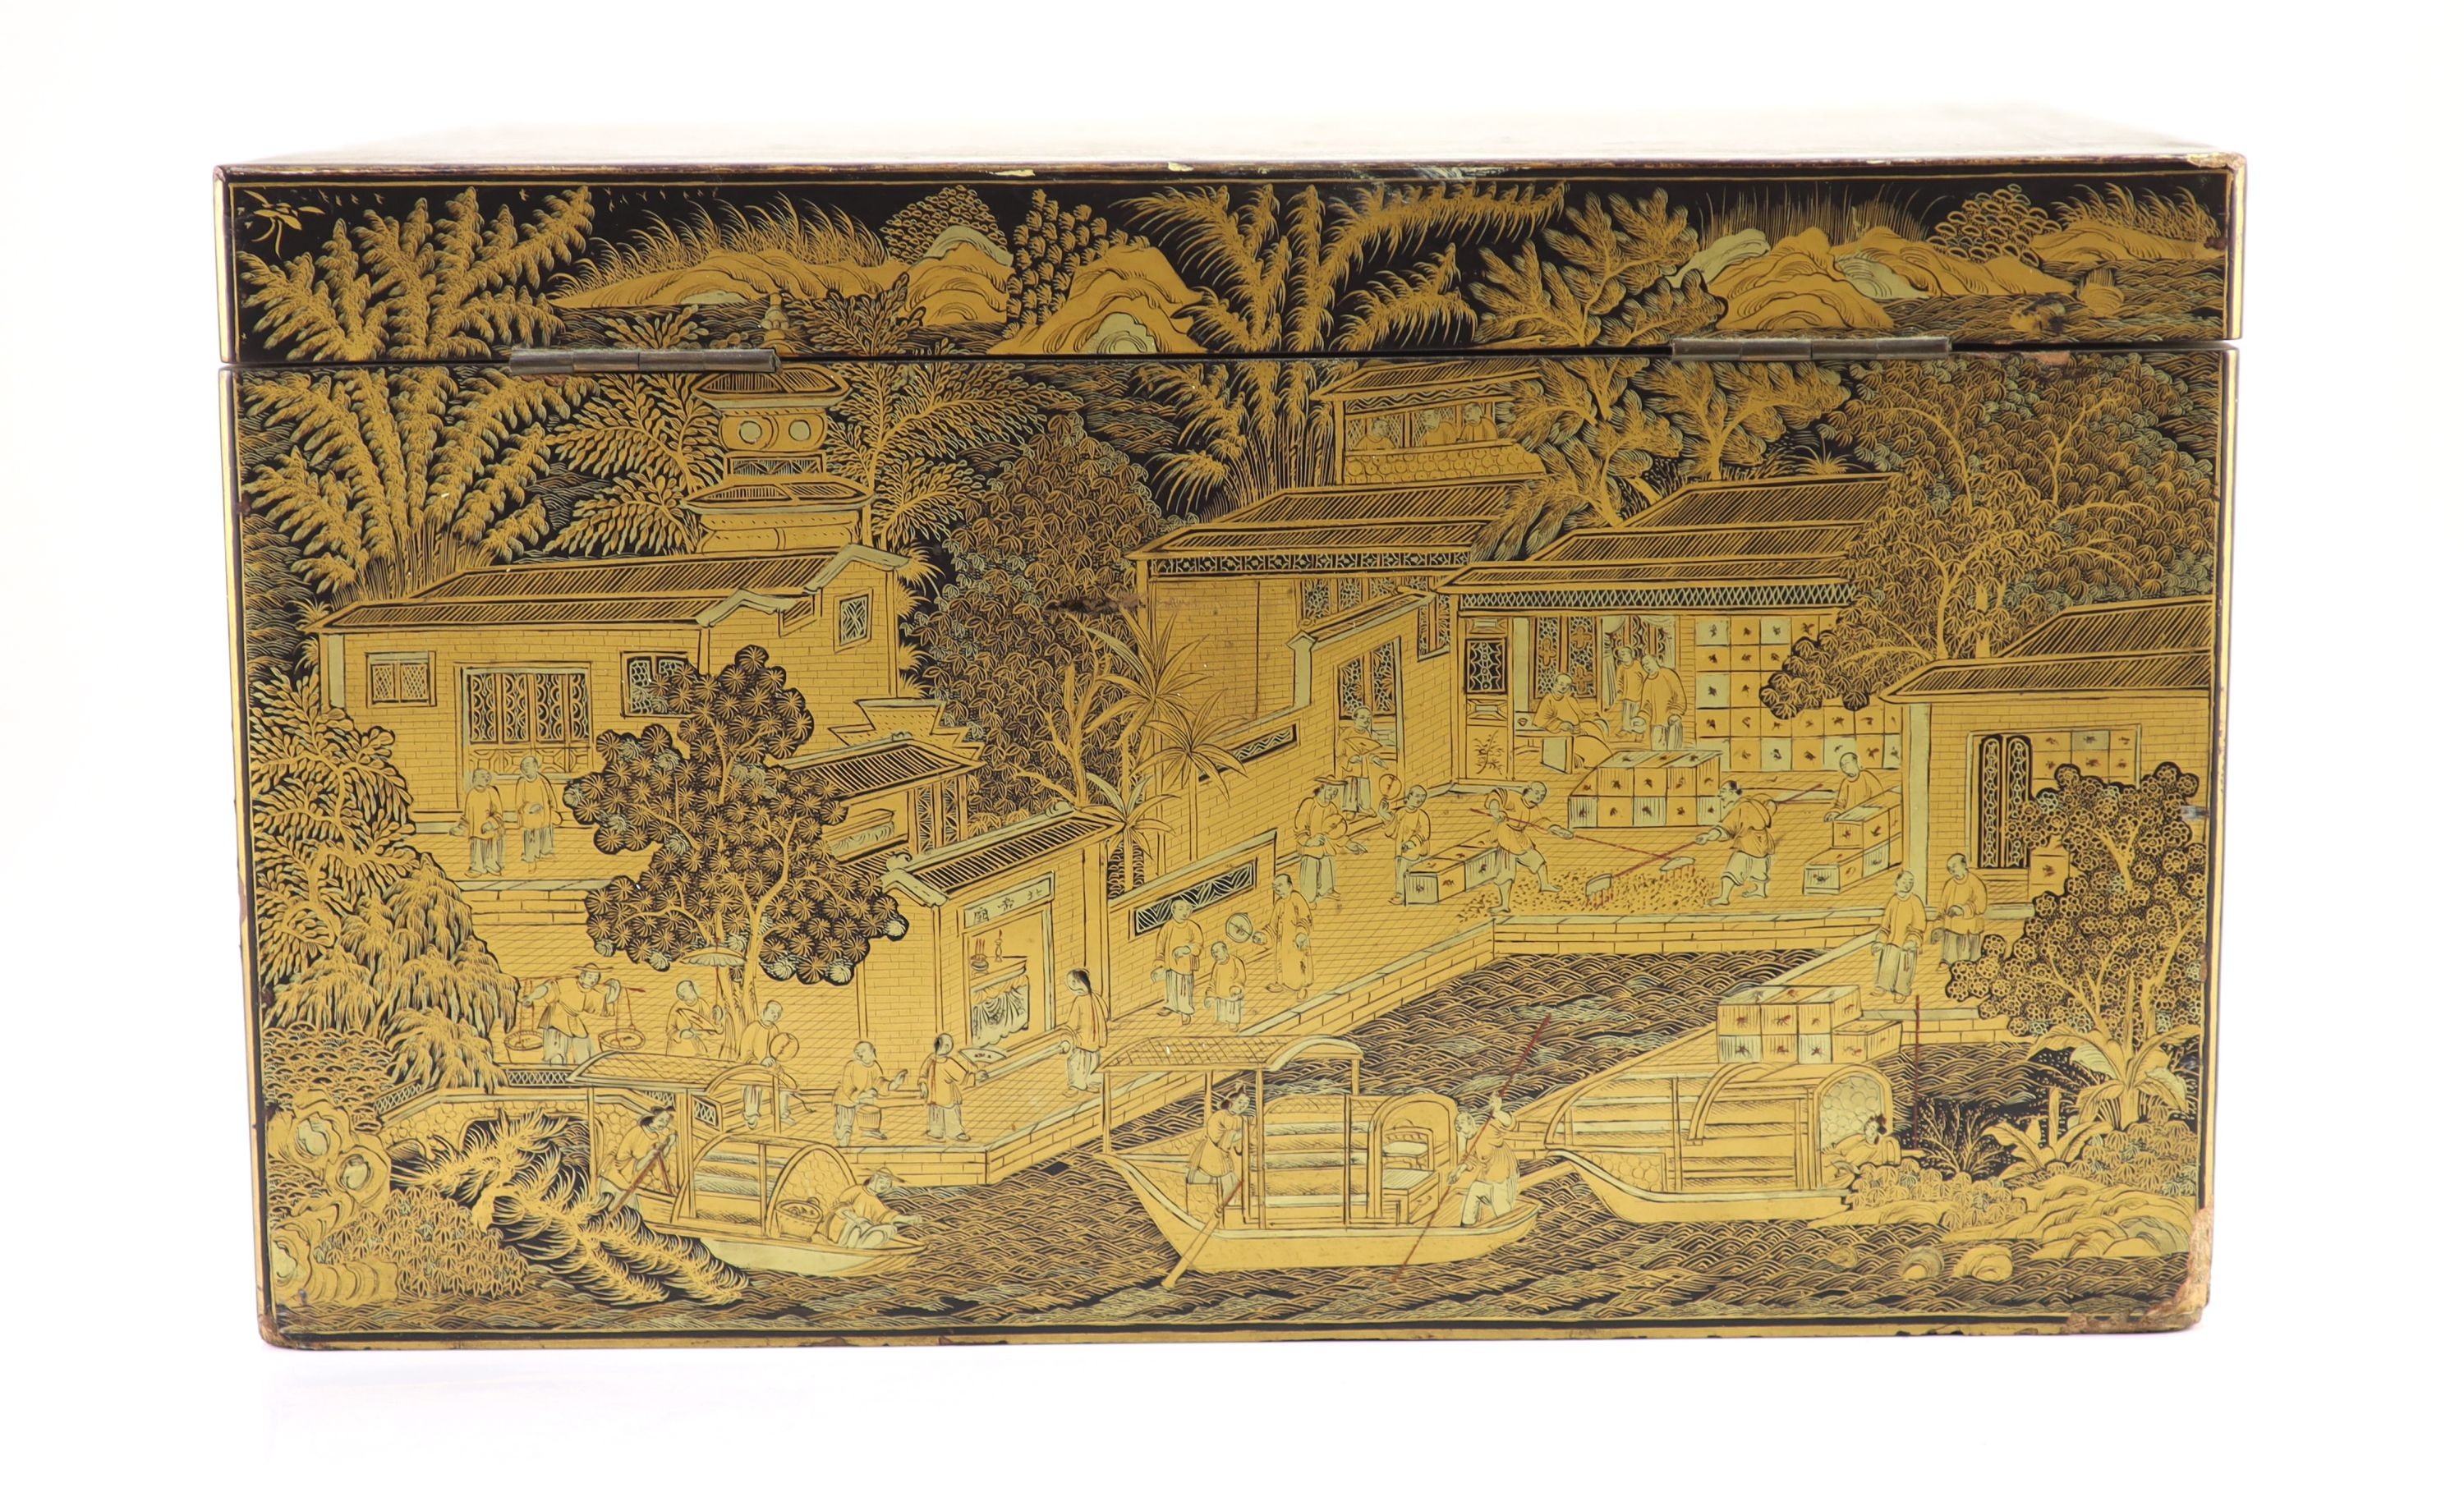 A Chinese export gilt decorated black lacquer tea chest, early 19th century,typically decorated with - Image 6 of 10